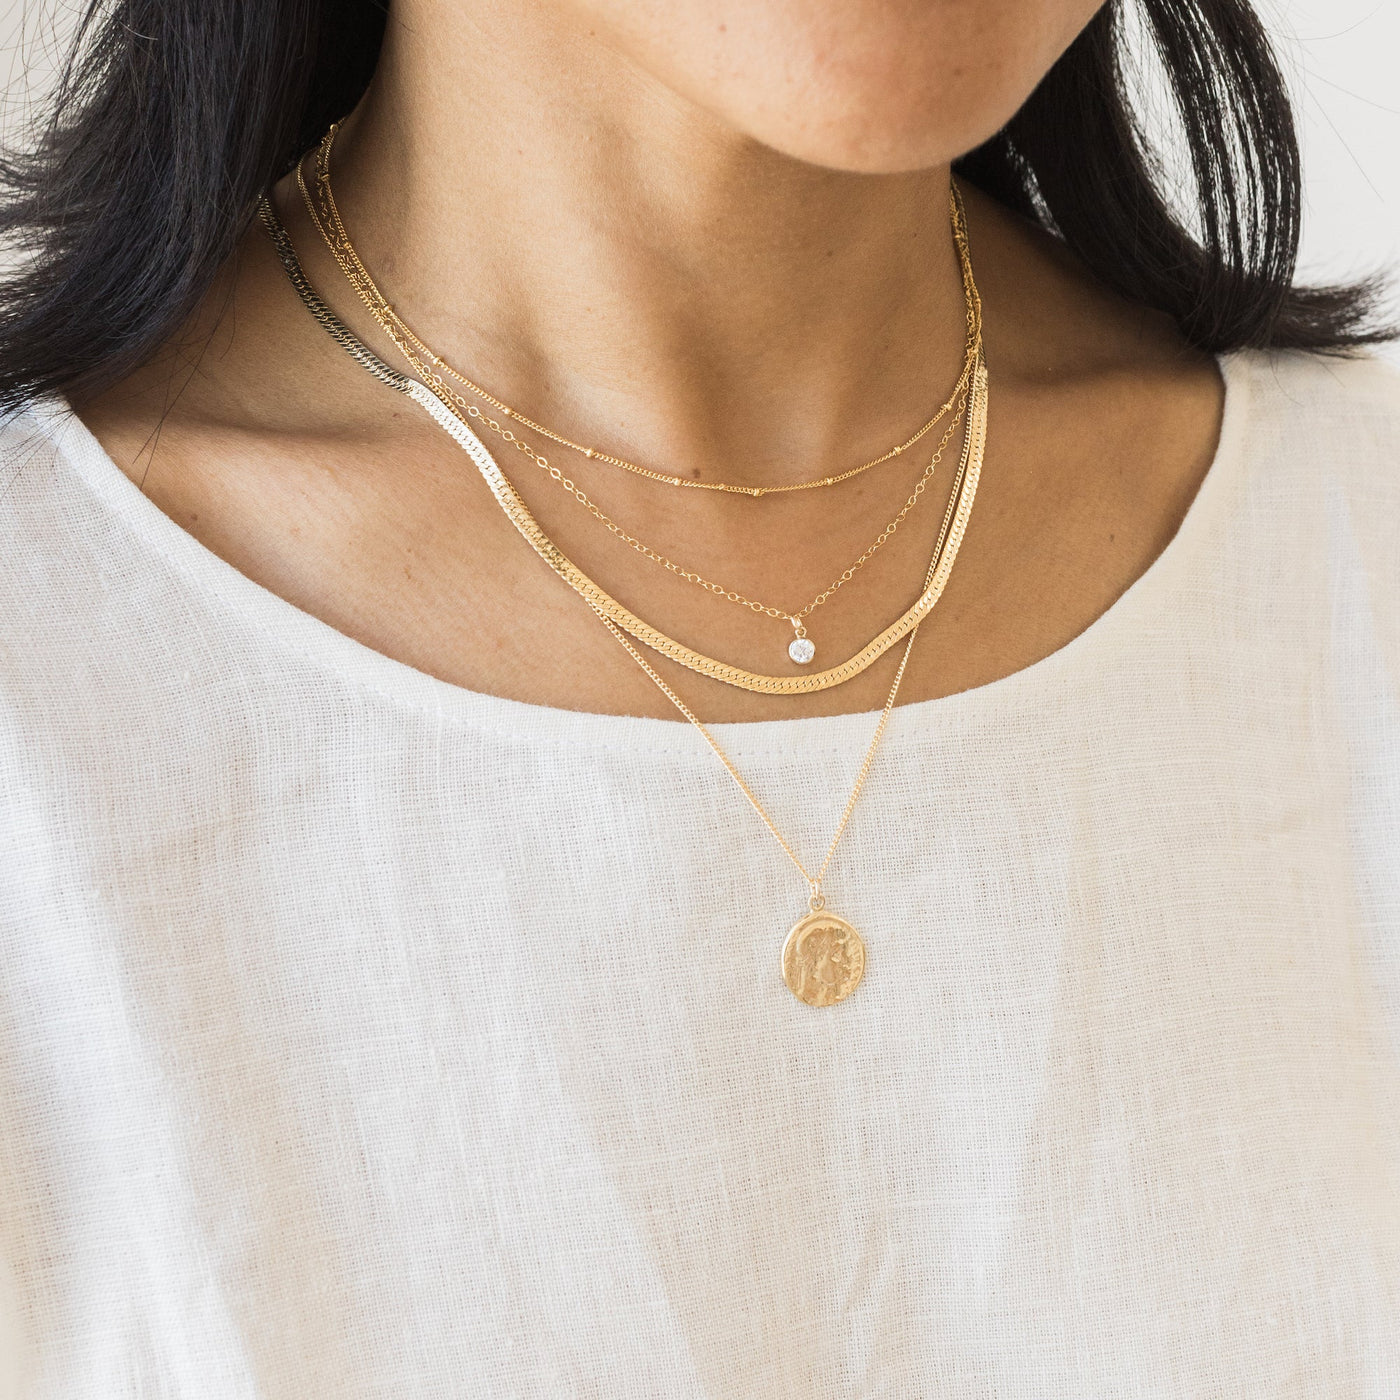 Top 7 Gold Herringbone Chain Necklaces You Will Love | Classy Women  Collection